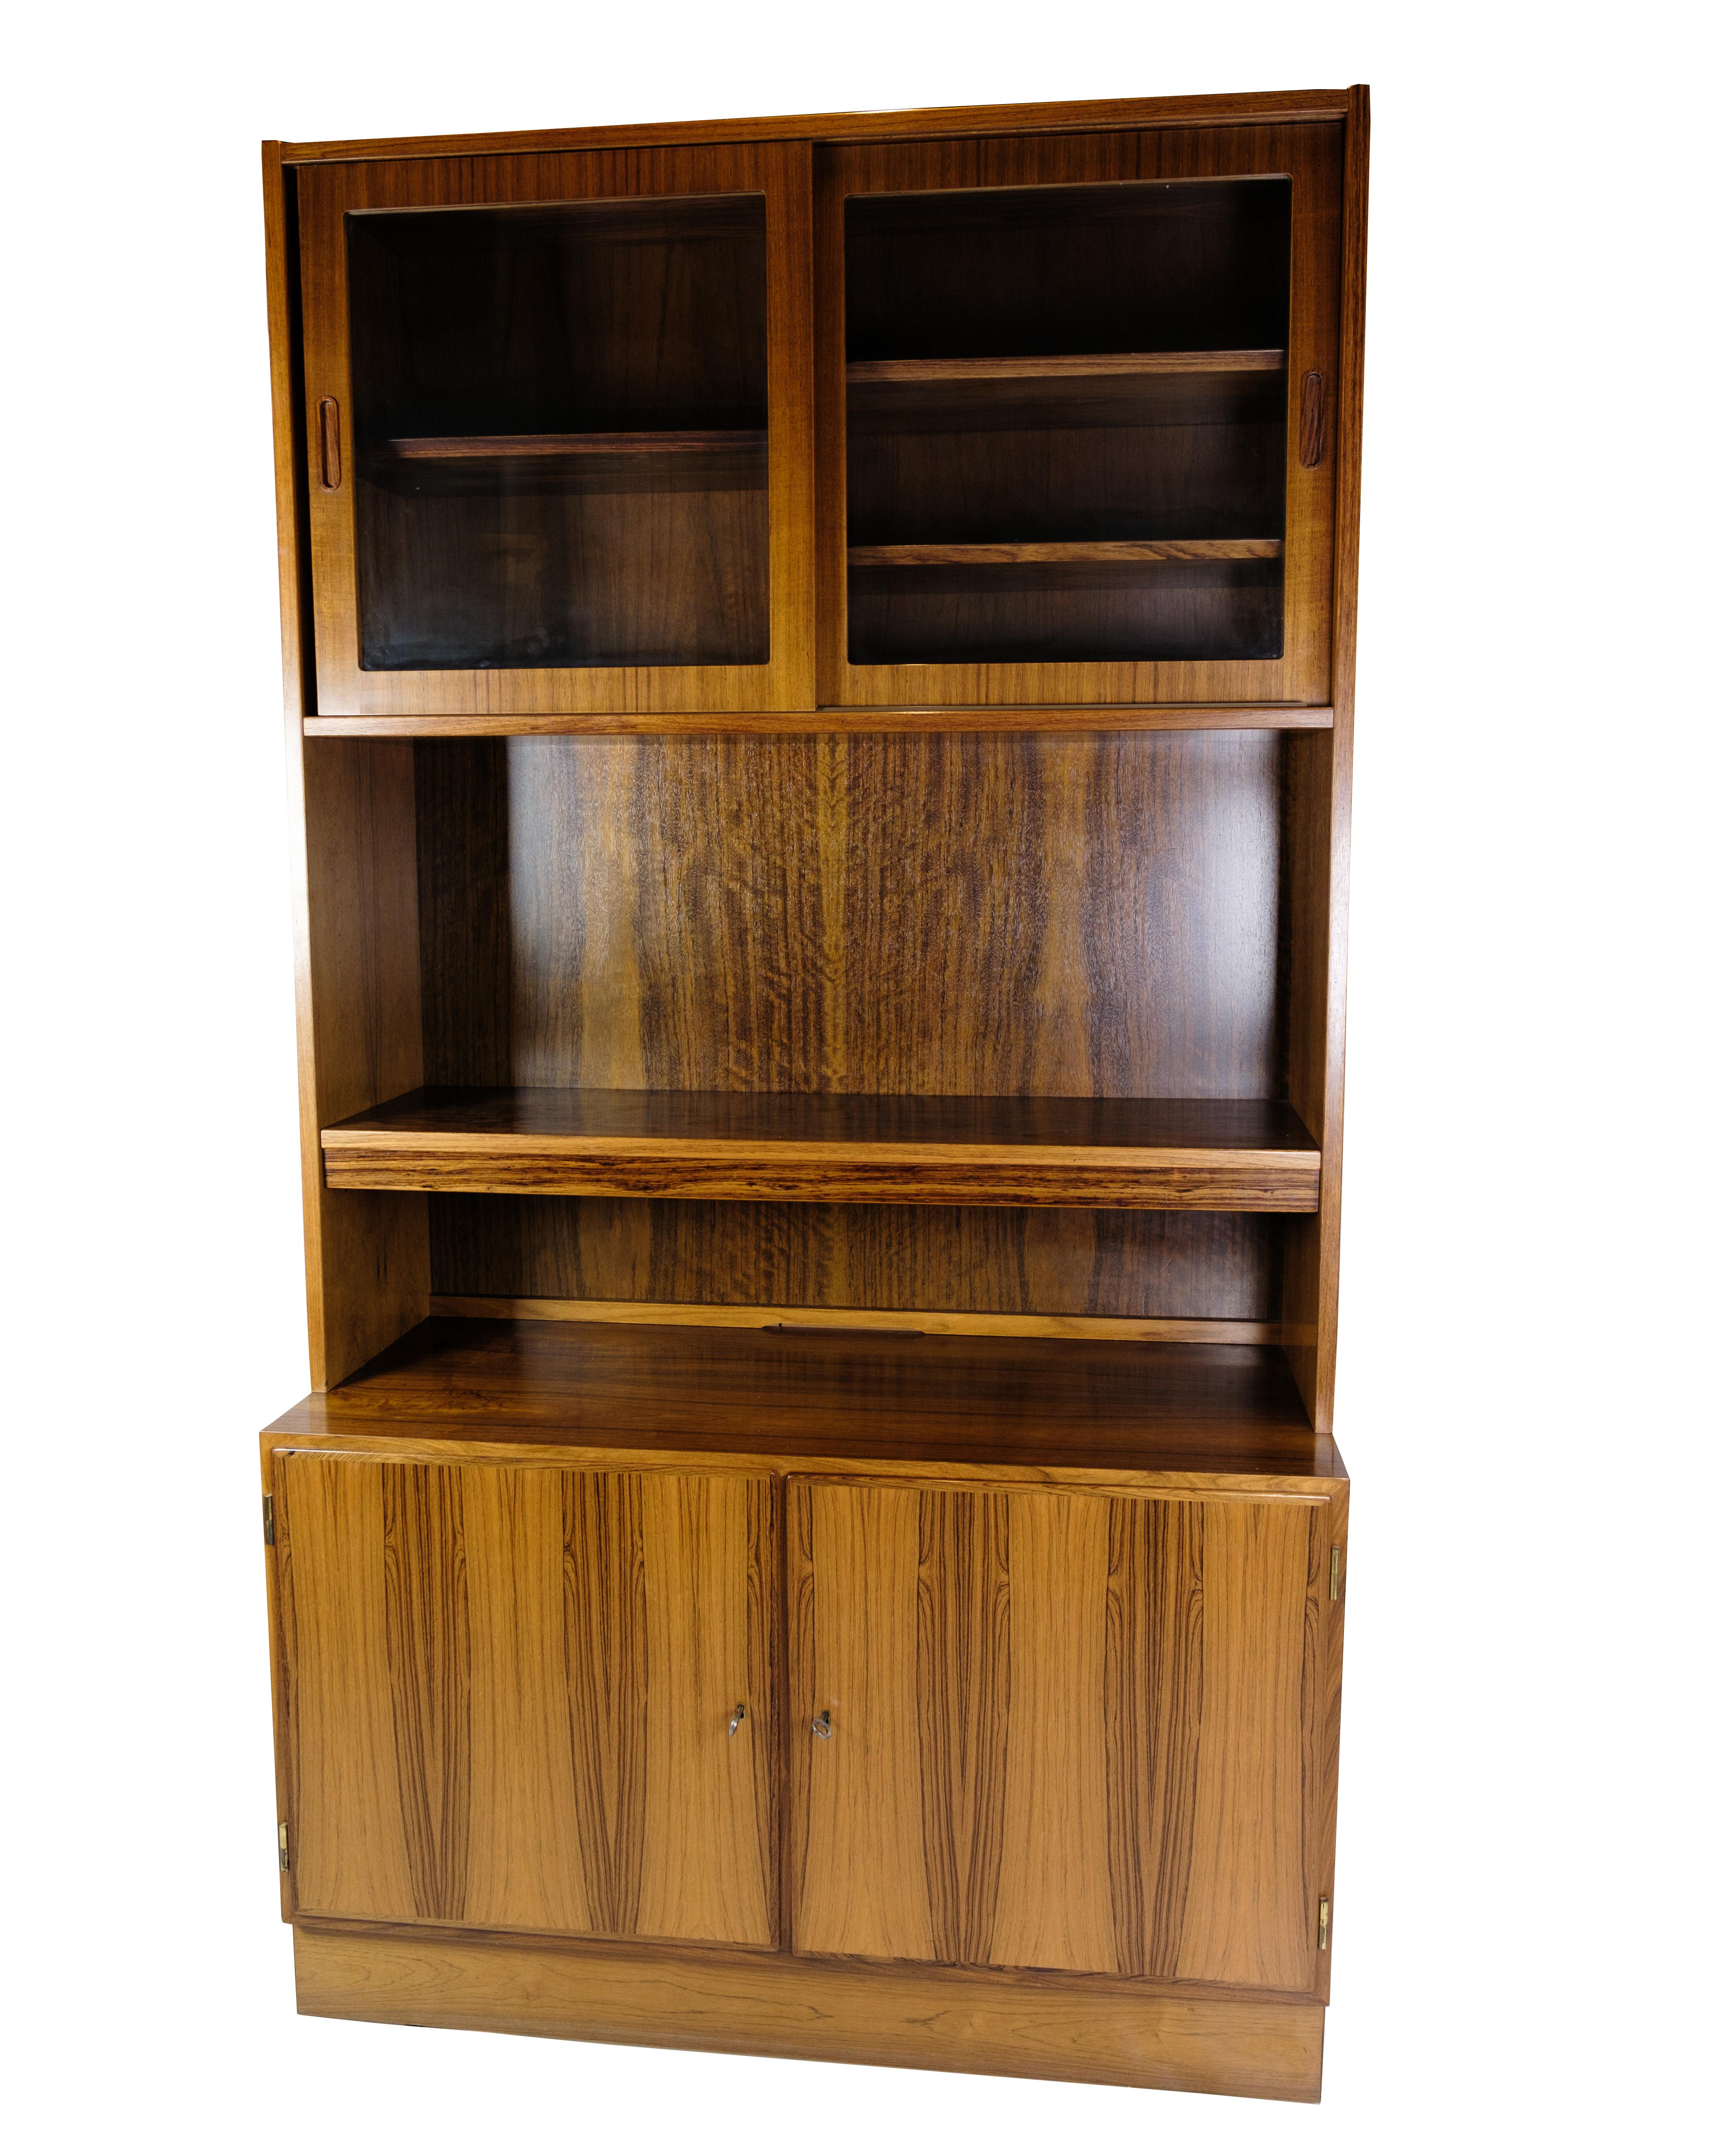 This bookcase in rosewood from Hundevad is an impressive example of Danish furniture design from the 1960s. Hundevad, a renowned furniture manufacturer known for their high quality and timeless design, is behind this piece of furniture.

Made from